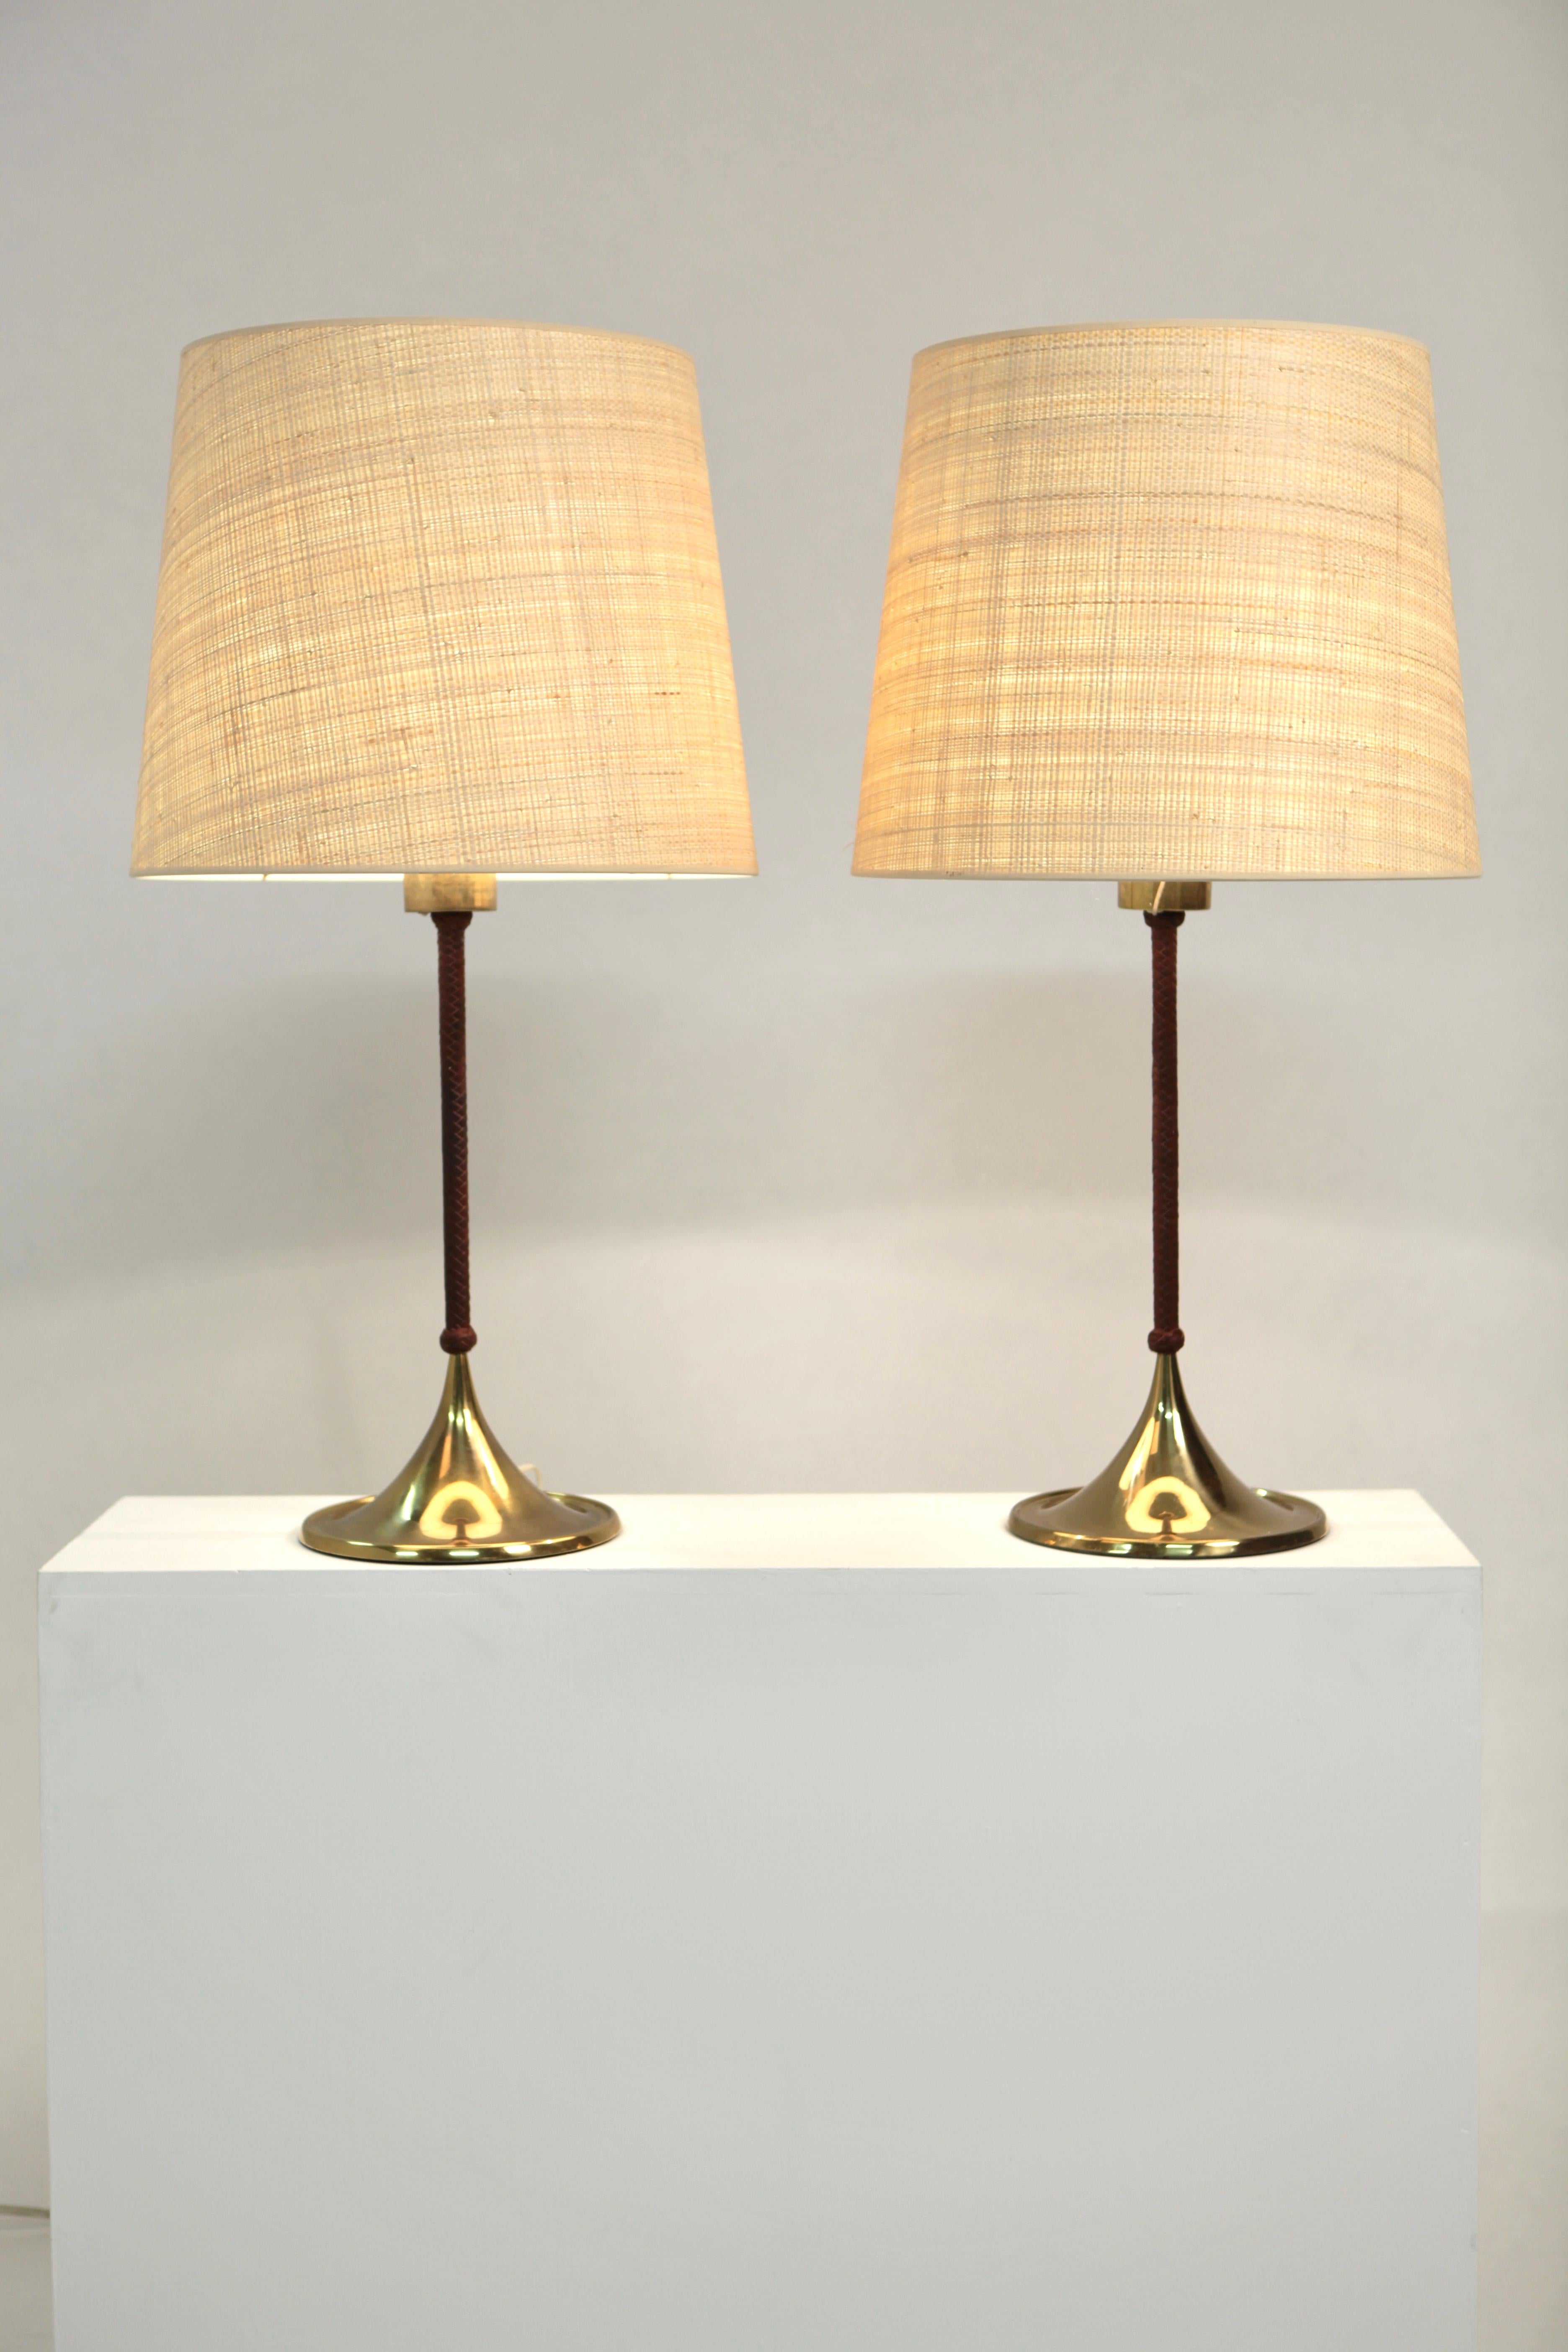 A rare pair of table lamps, model B-024 in brass and braided leather covered stem.
Produced in Sweden in the 1950s. Good vintage condition.
Please note, the Raffia shades are nor original and are not included in the sales price.